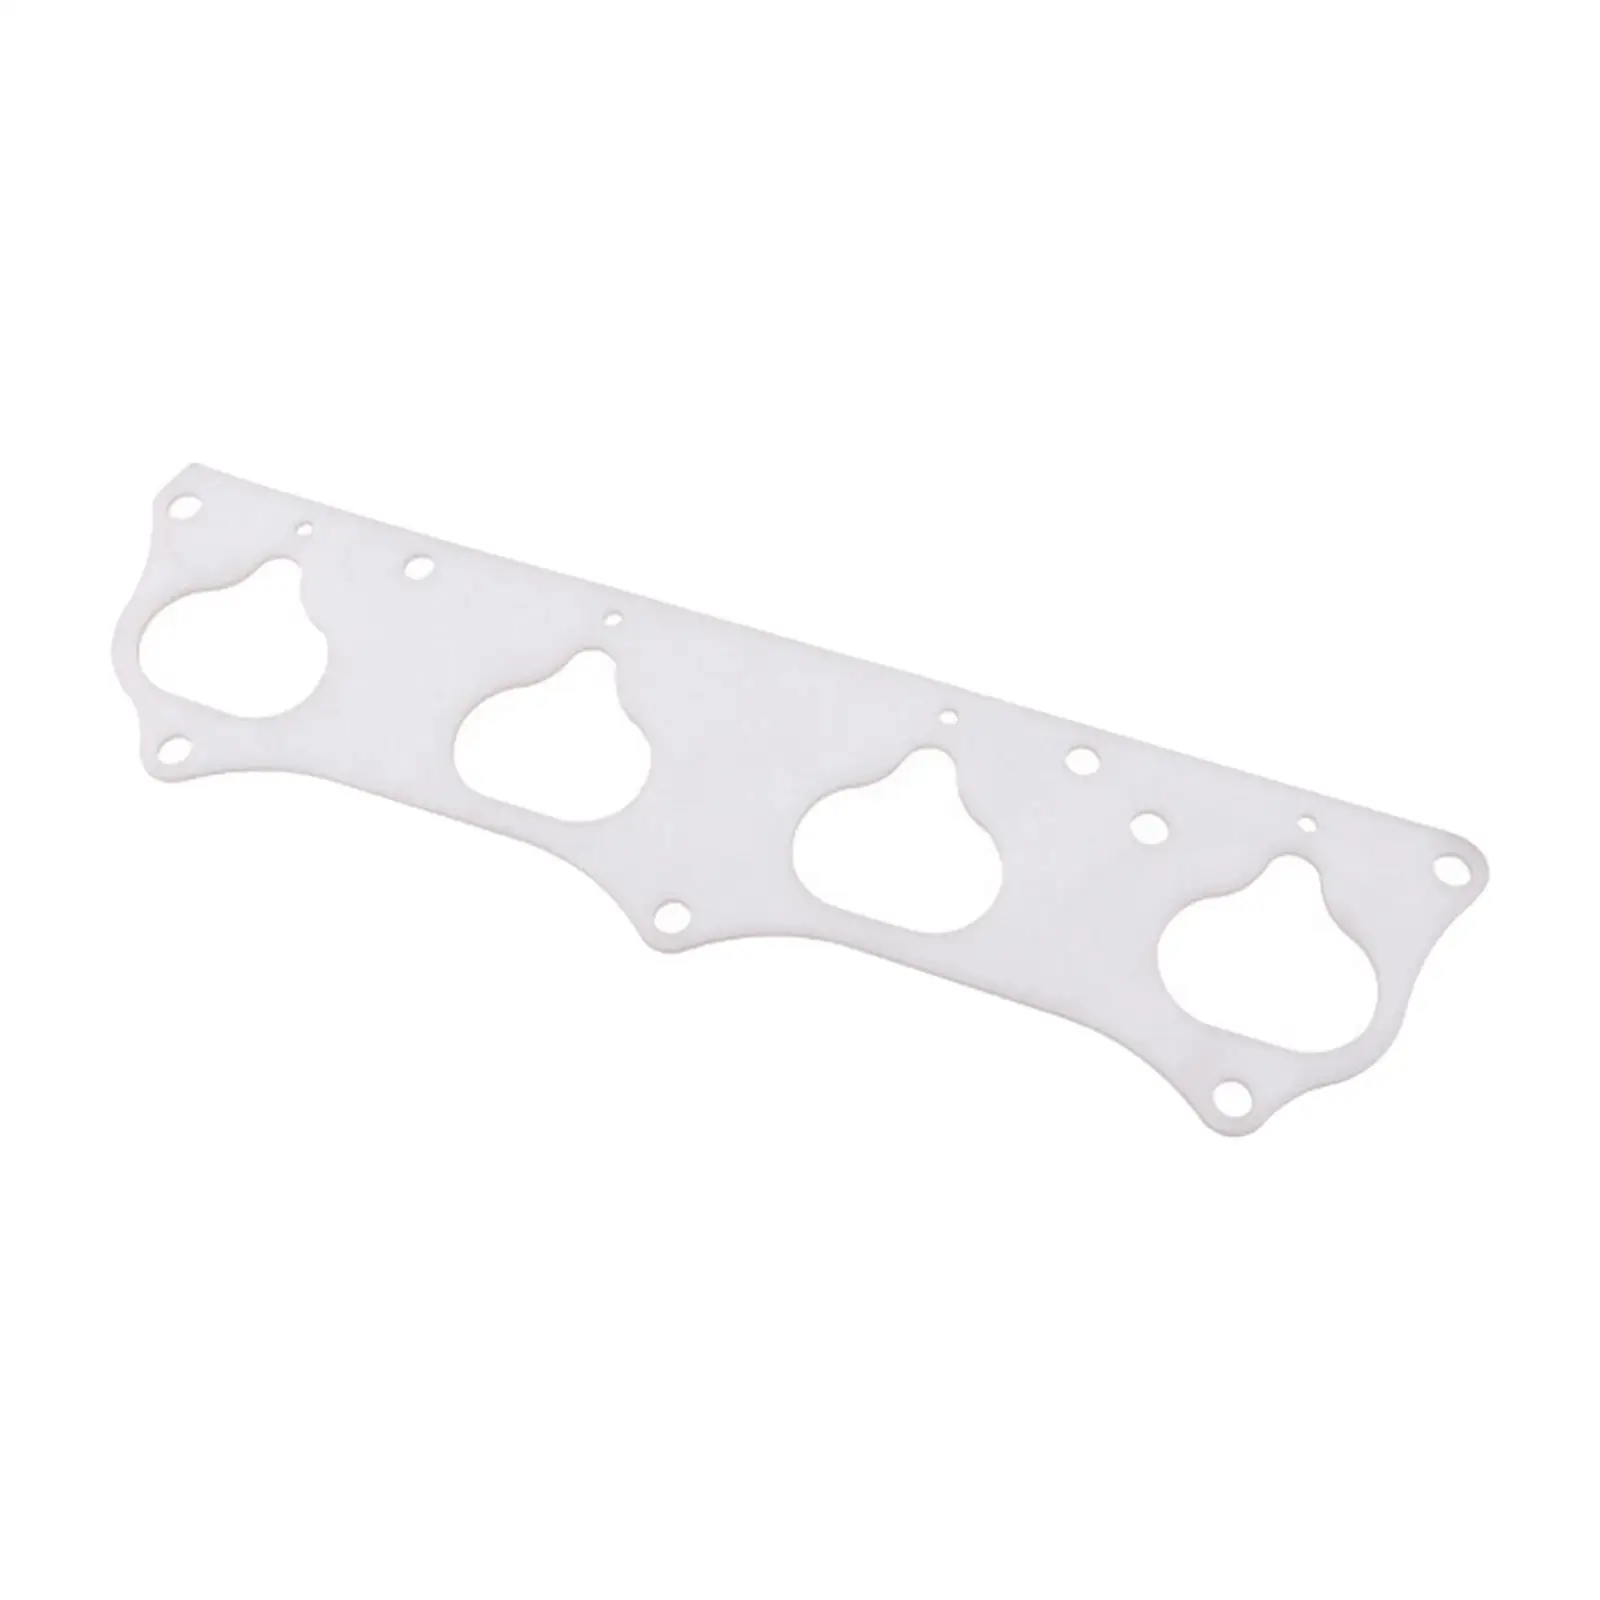 Thermal Intake Manifold Gasket Premium High Performance Durable Replacement Accessories for Swap K20A/A2/A3/Z1 K-series